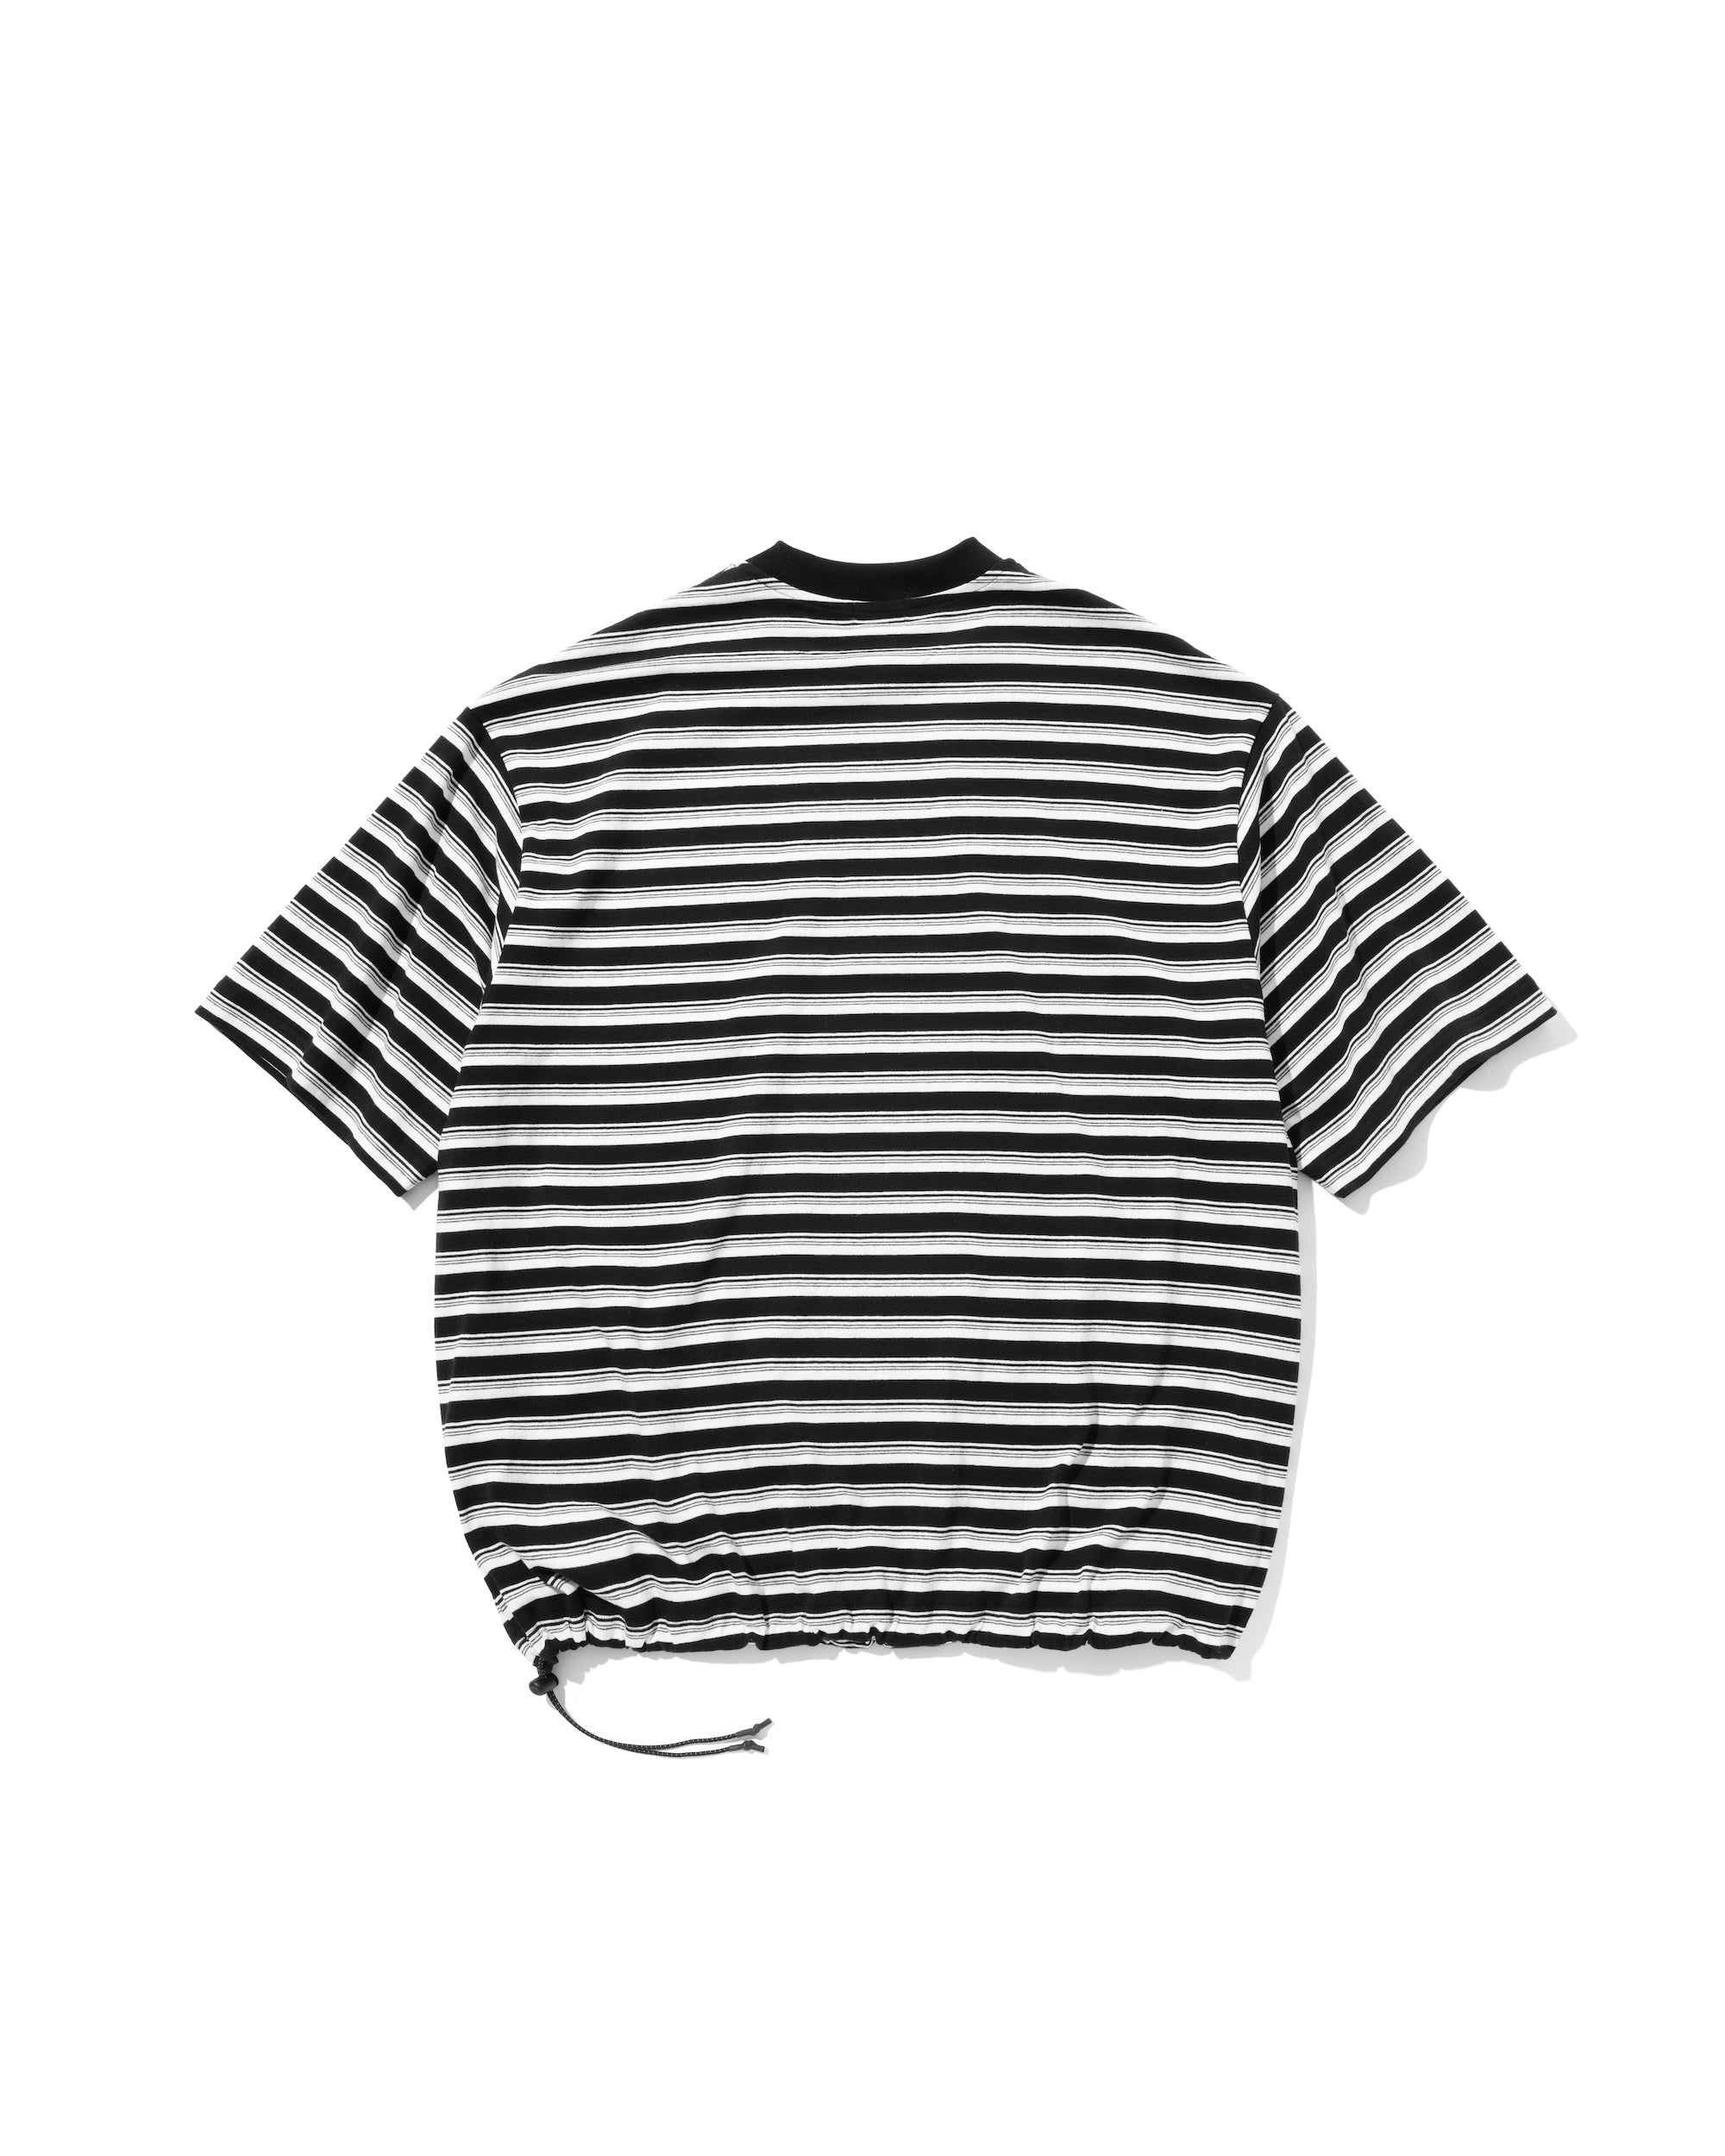 【7.3 WED 20:00- IN STOCK】MULTI STRIPED MASSIVE T-SHIRT WITH DRAWSTRINGS